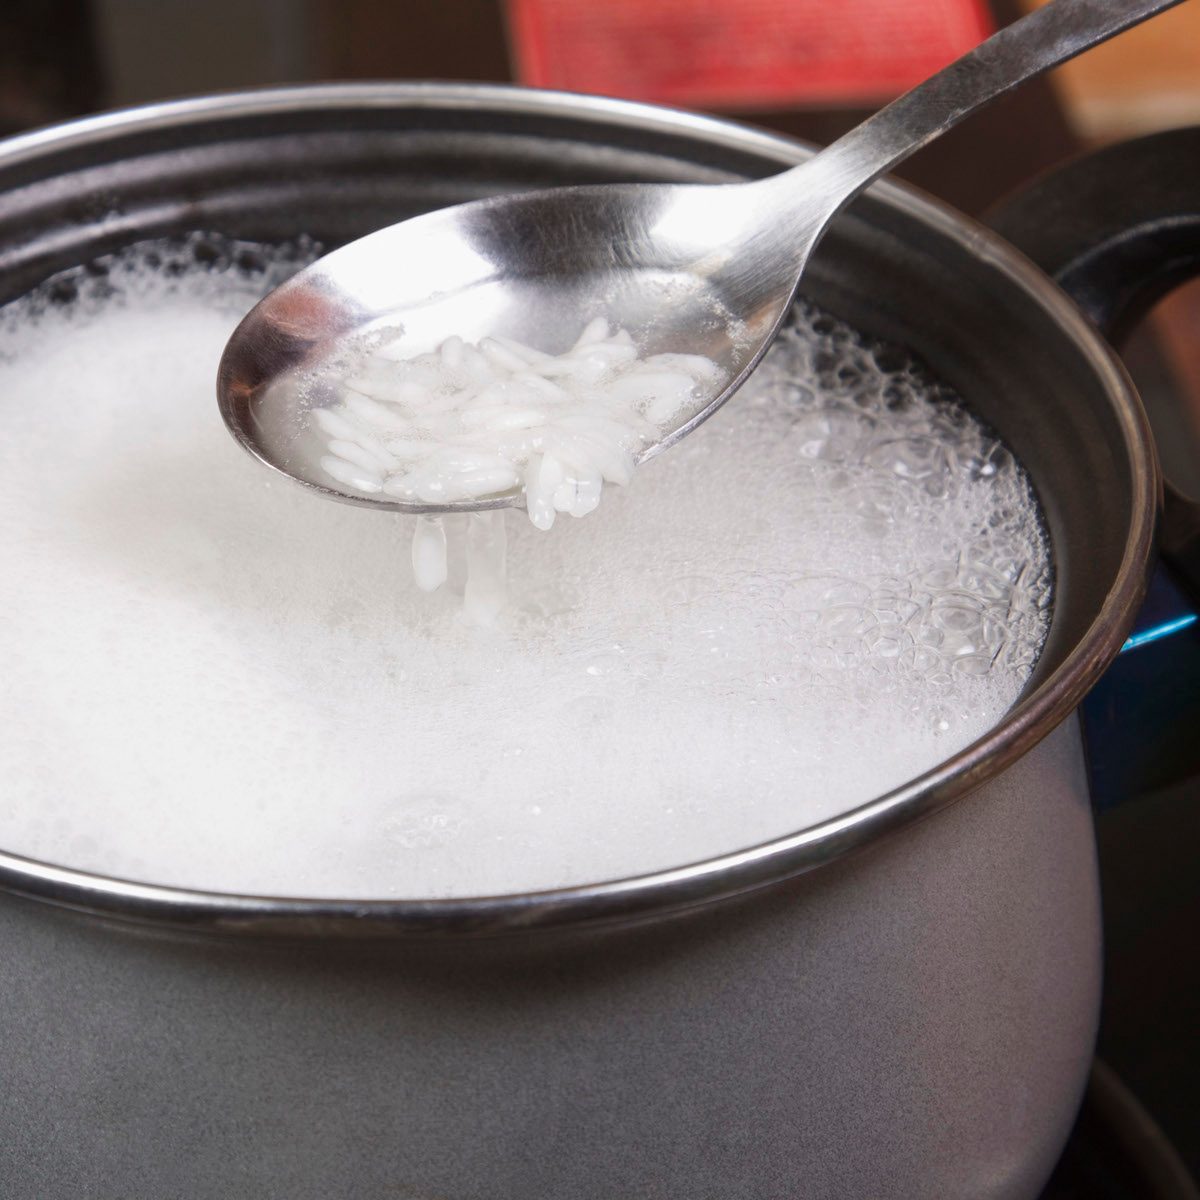 A spoonful of rice over a pot of boiling rice.